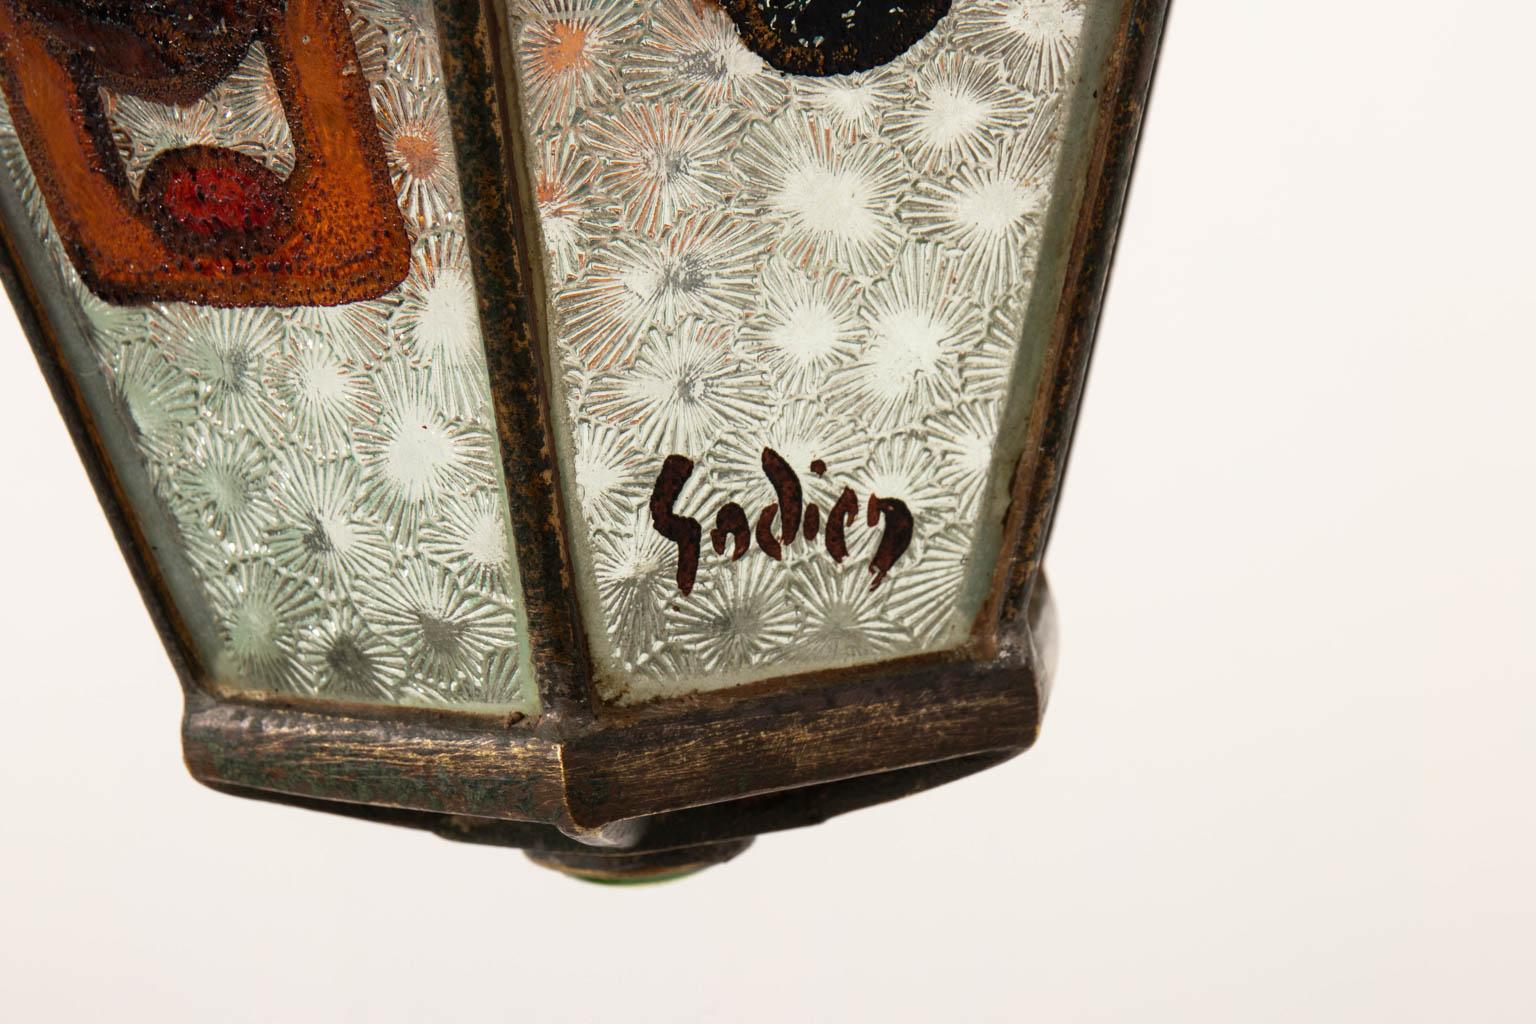 Cast bronze Art Nouveau ceiling light by Adrien Godien, circa 1890-1949. The piece is completely glazed and features six side panels of hand painted, patterned glass with one signed 